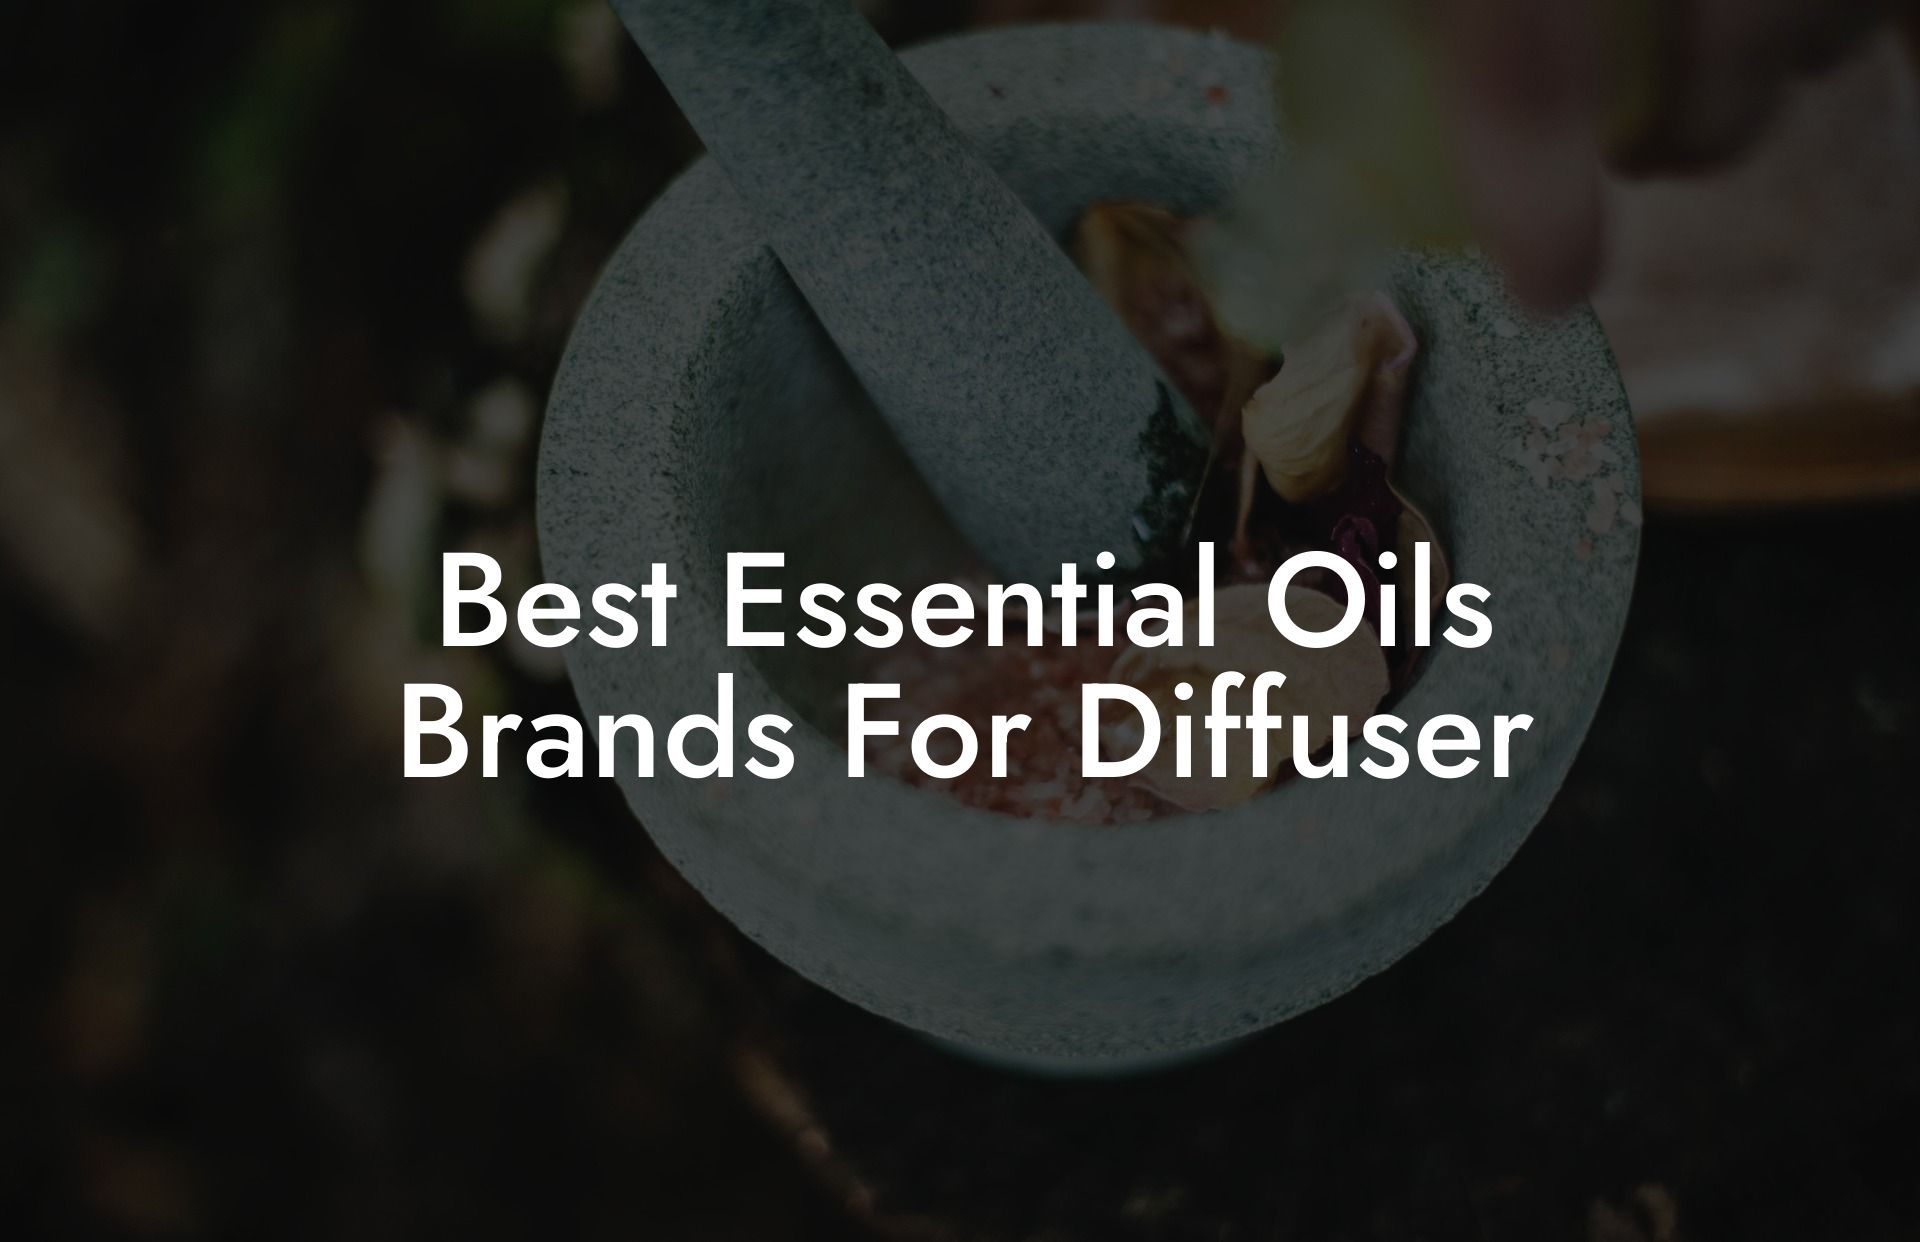 Best Essential Oils Brands For Diffuser